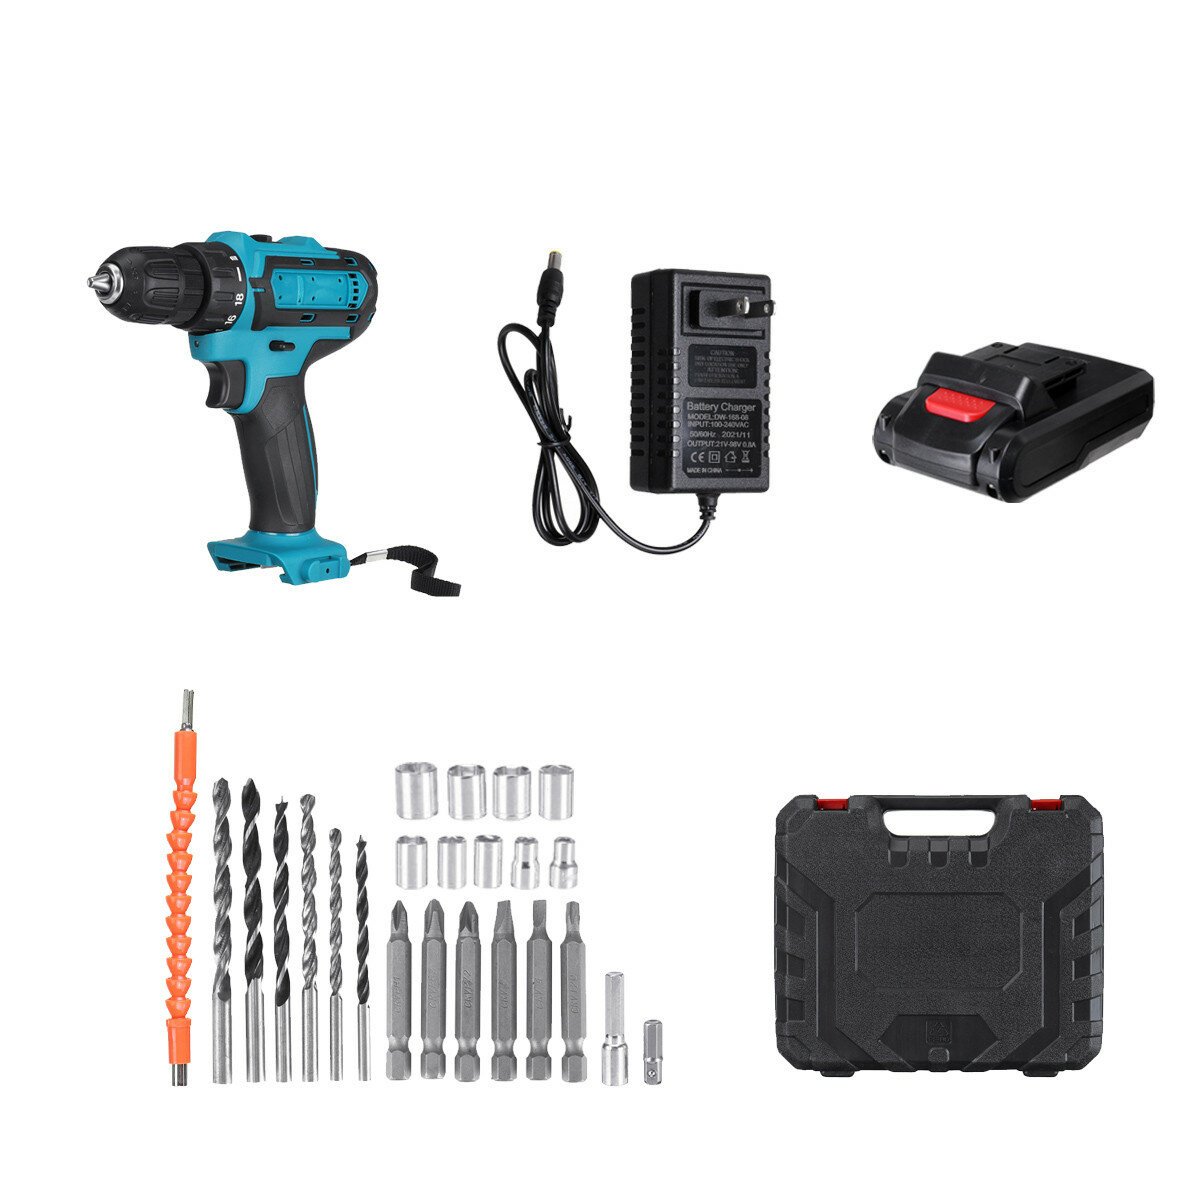 Image of 2000rpm 38Nm 21V Lithium Electric Impact Hammer Drill Wood Drilling Screwdrivers with Battery